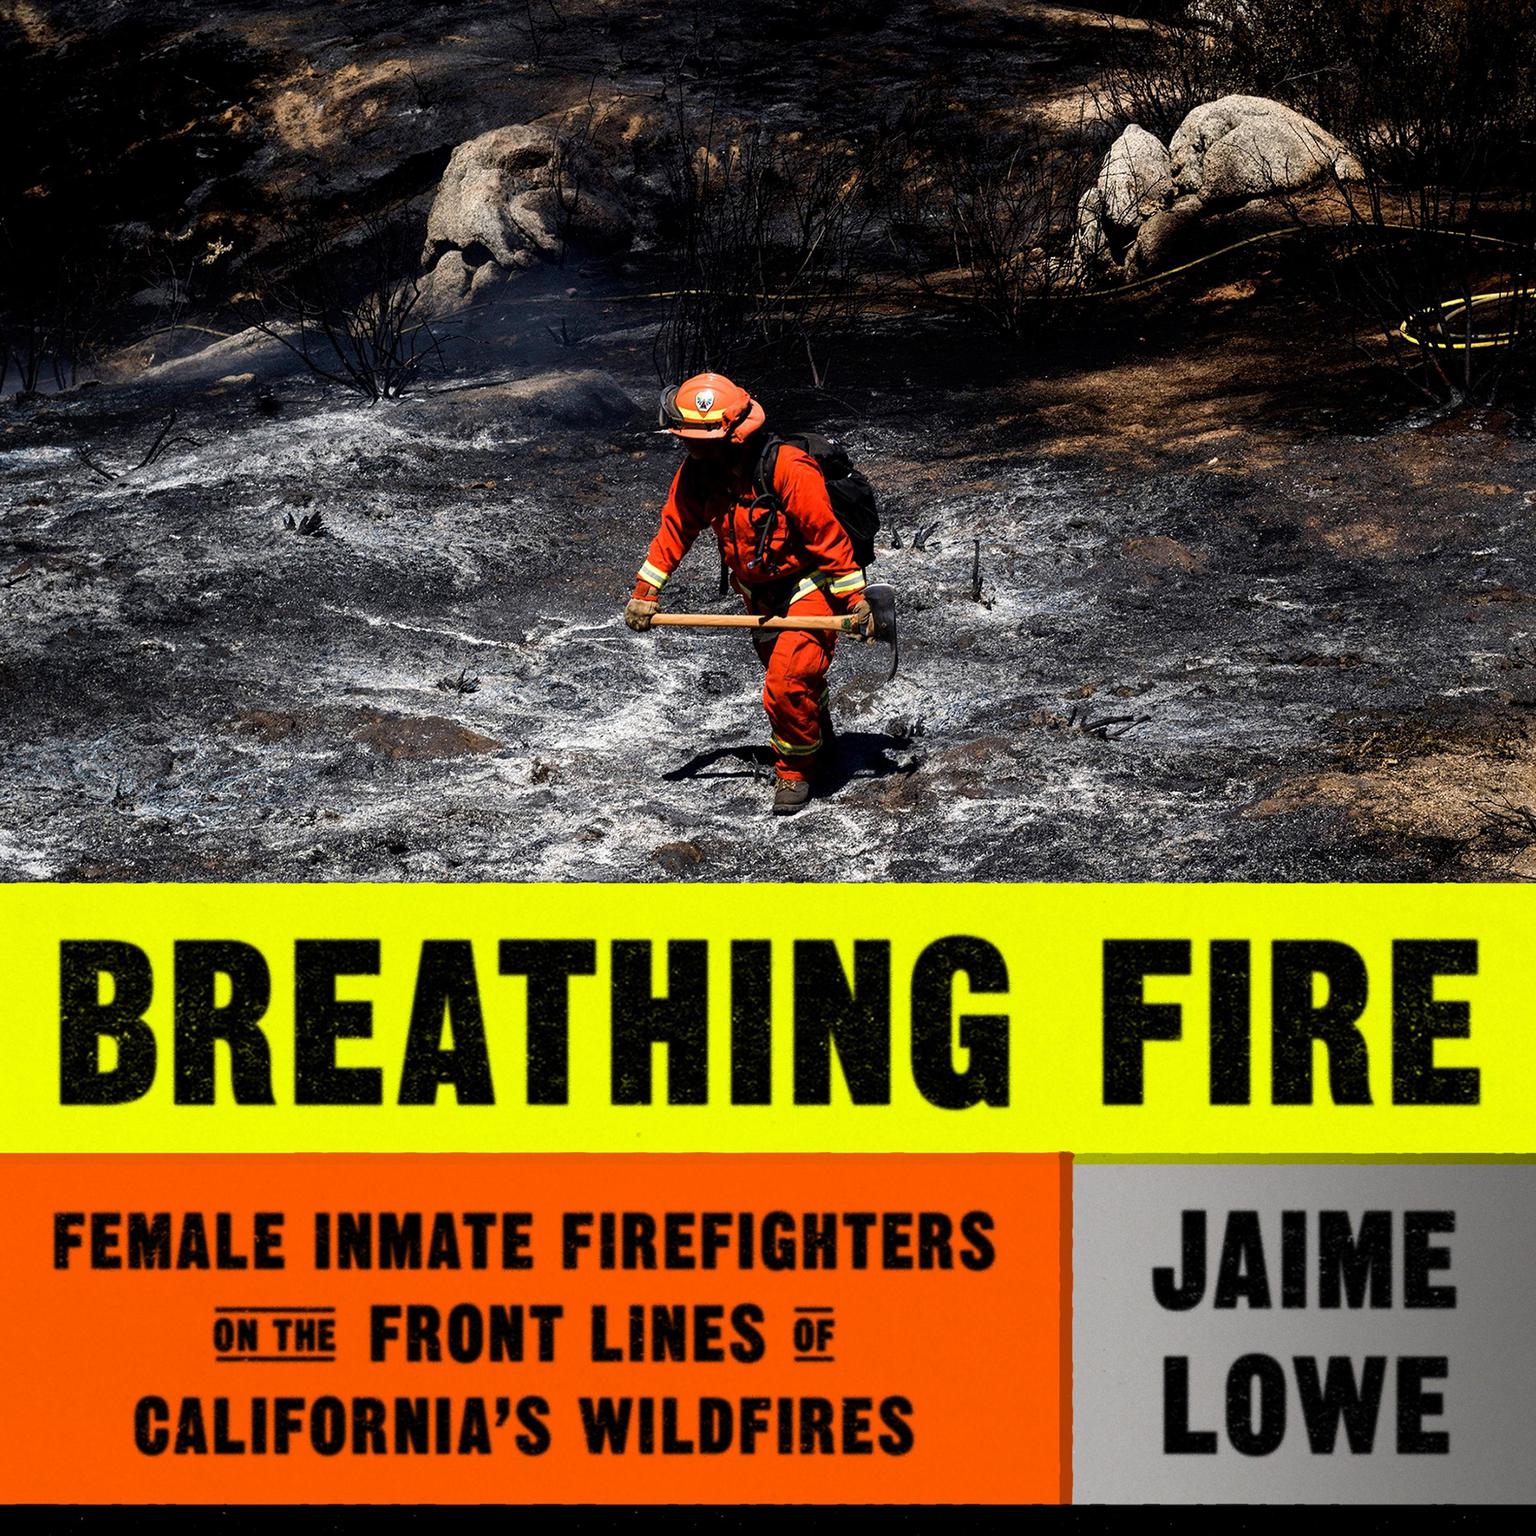 Breathing Fire: Female Inmate Firefighters on the Front Lines of Californias Wildfires Audiobook, by Jaime Lowe